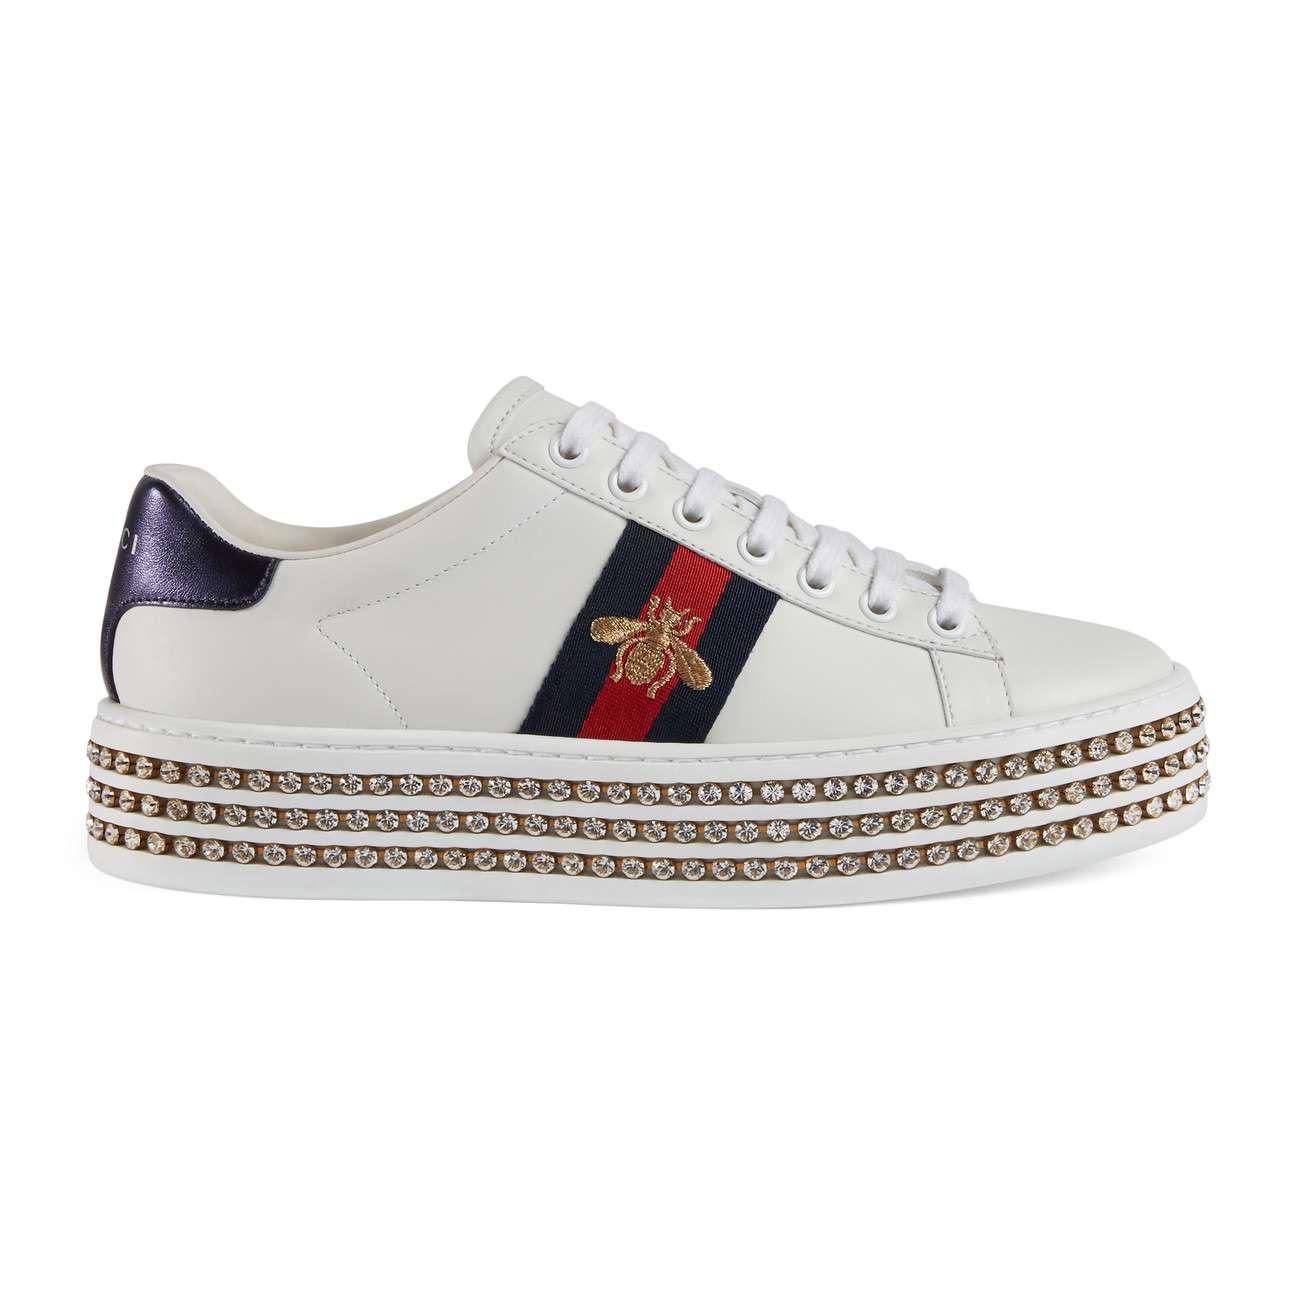 Gucci Ace Sneaker With Crystals in Blue